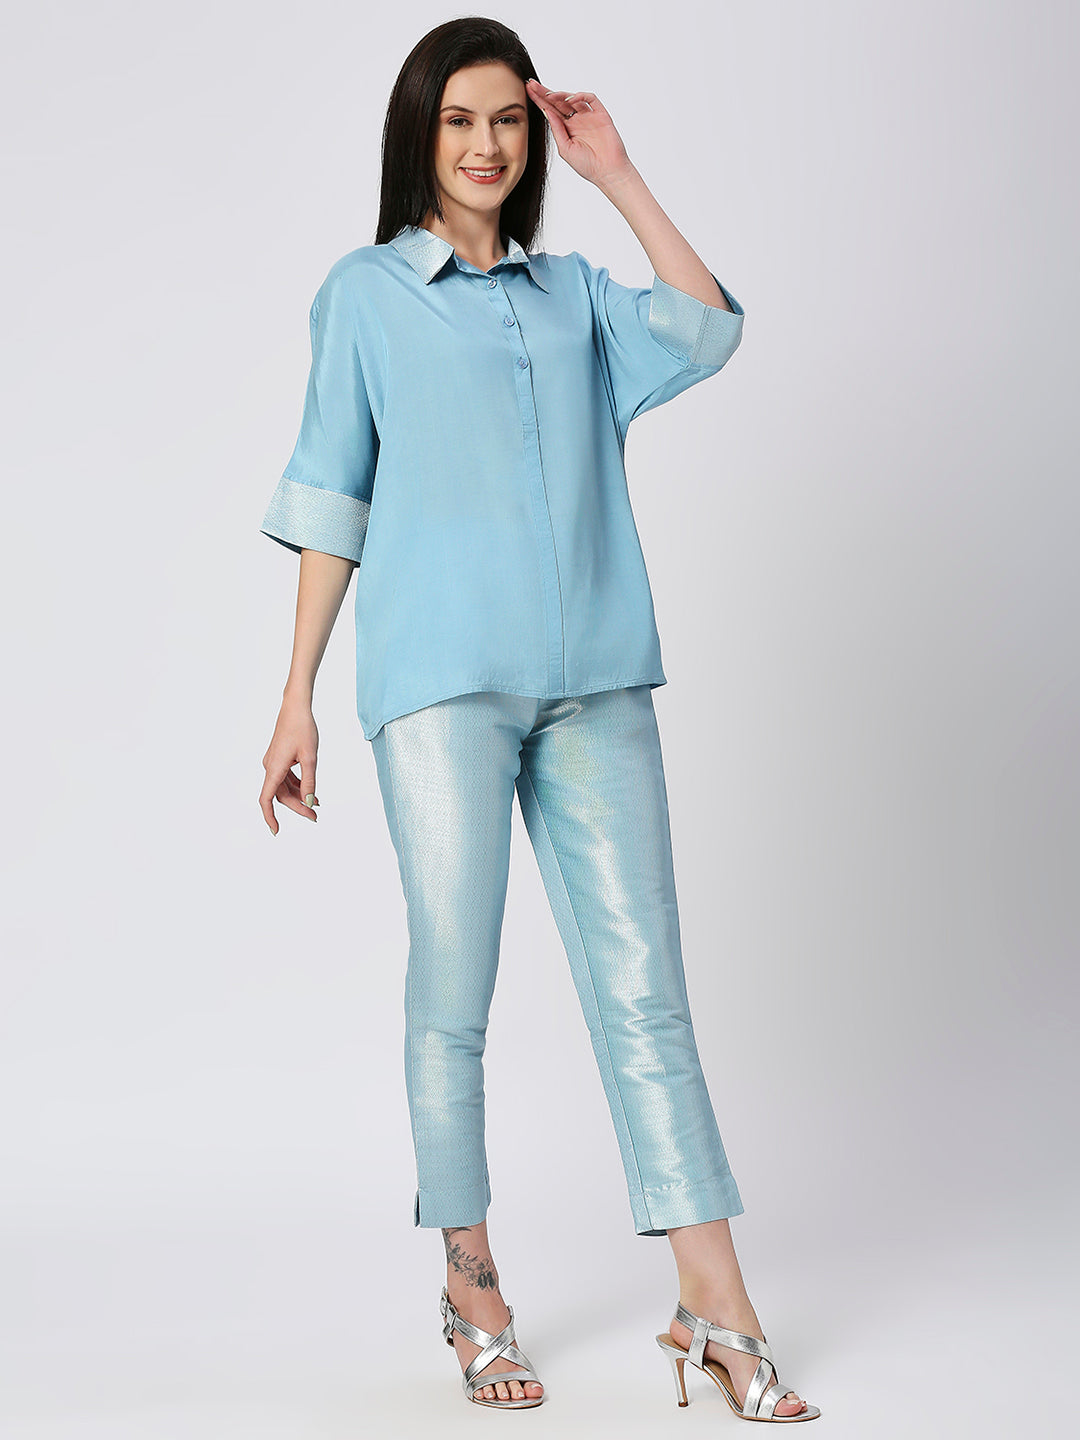 Iceblue Solid Viscose Top with Brocade Trims & Pant